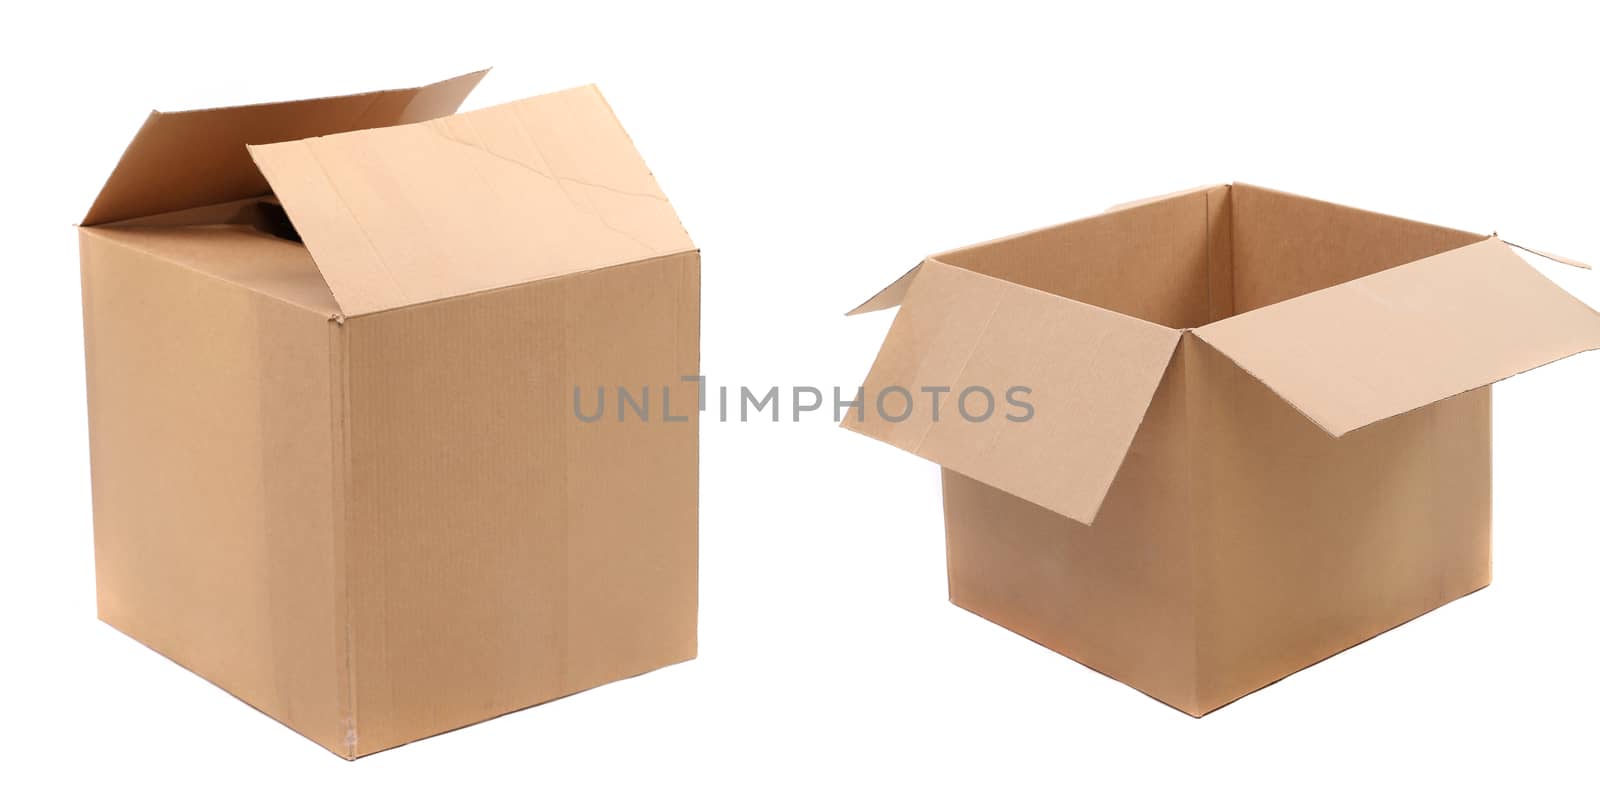 opened and closed corrugated cardboard boxes on a white background